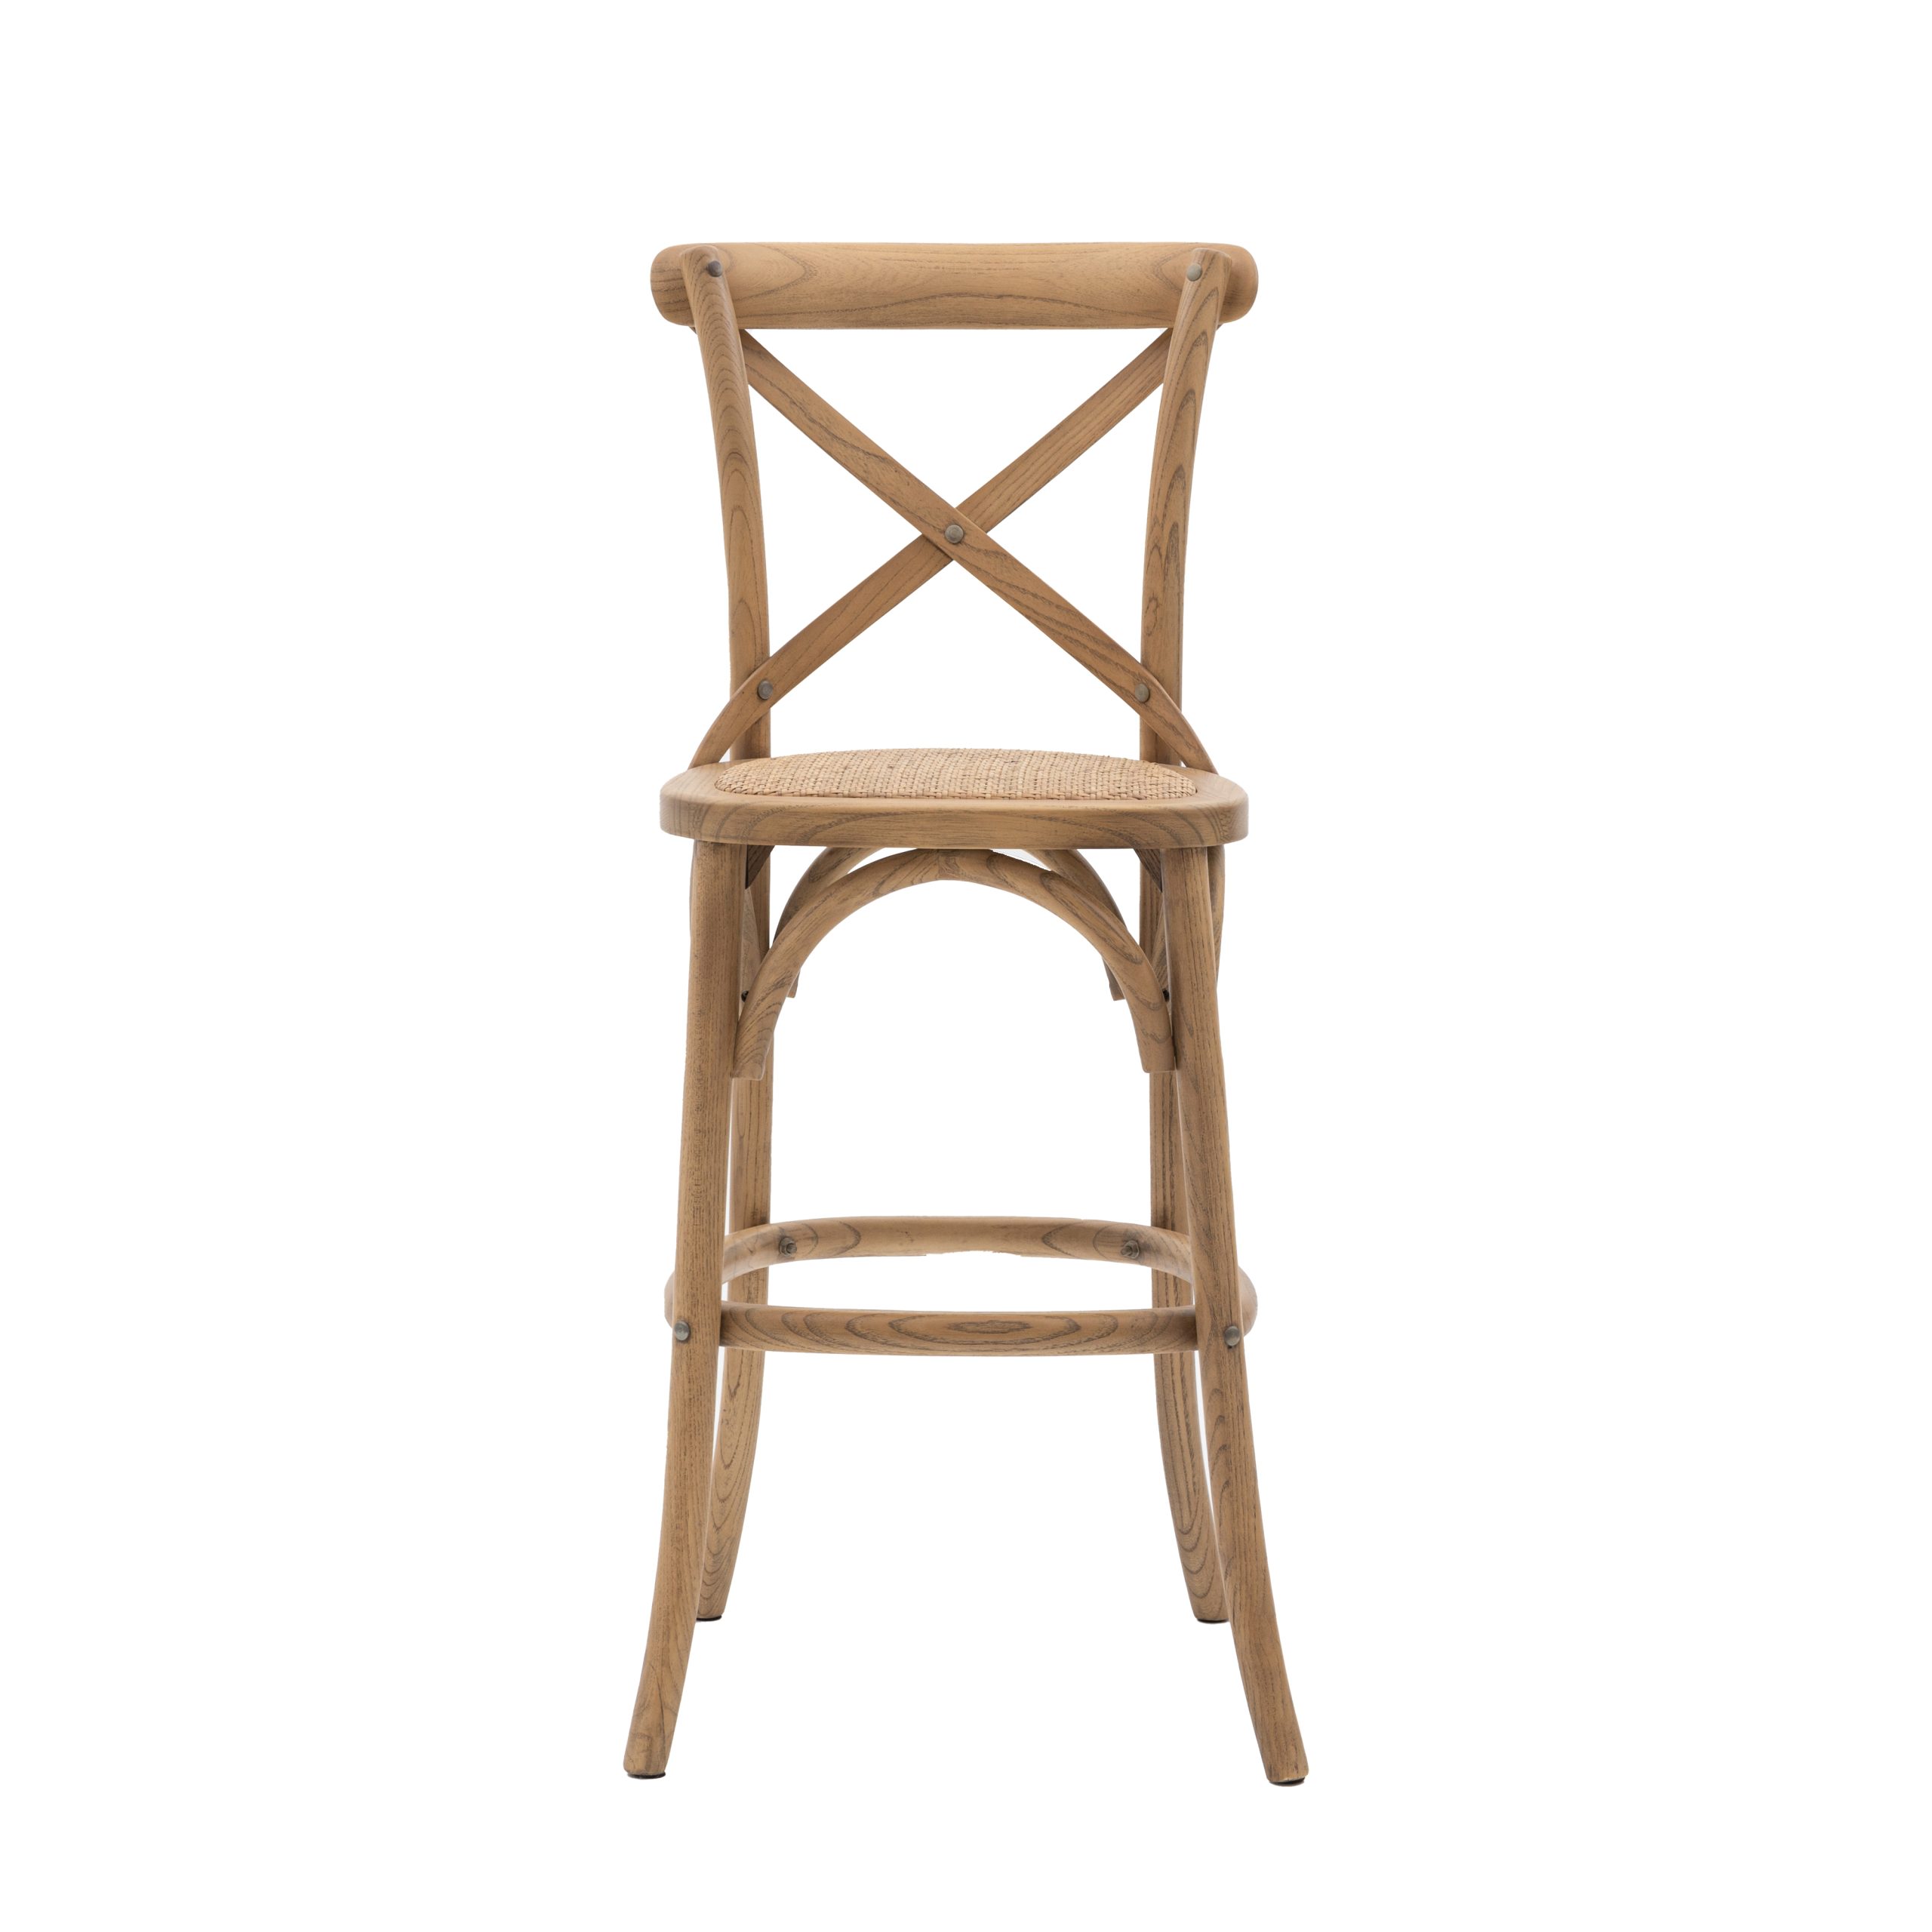 Gallery Direct Cafe Stool Natural/Rattan (Set of 2)